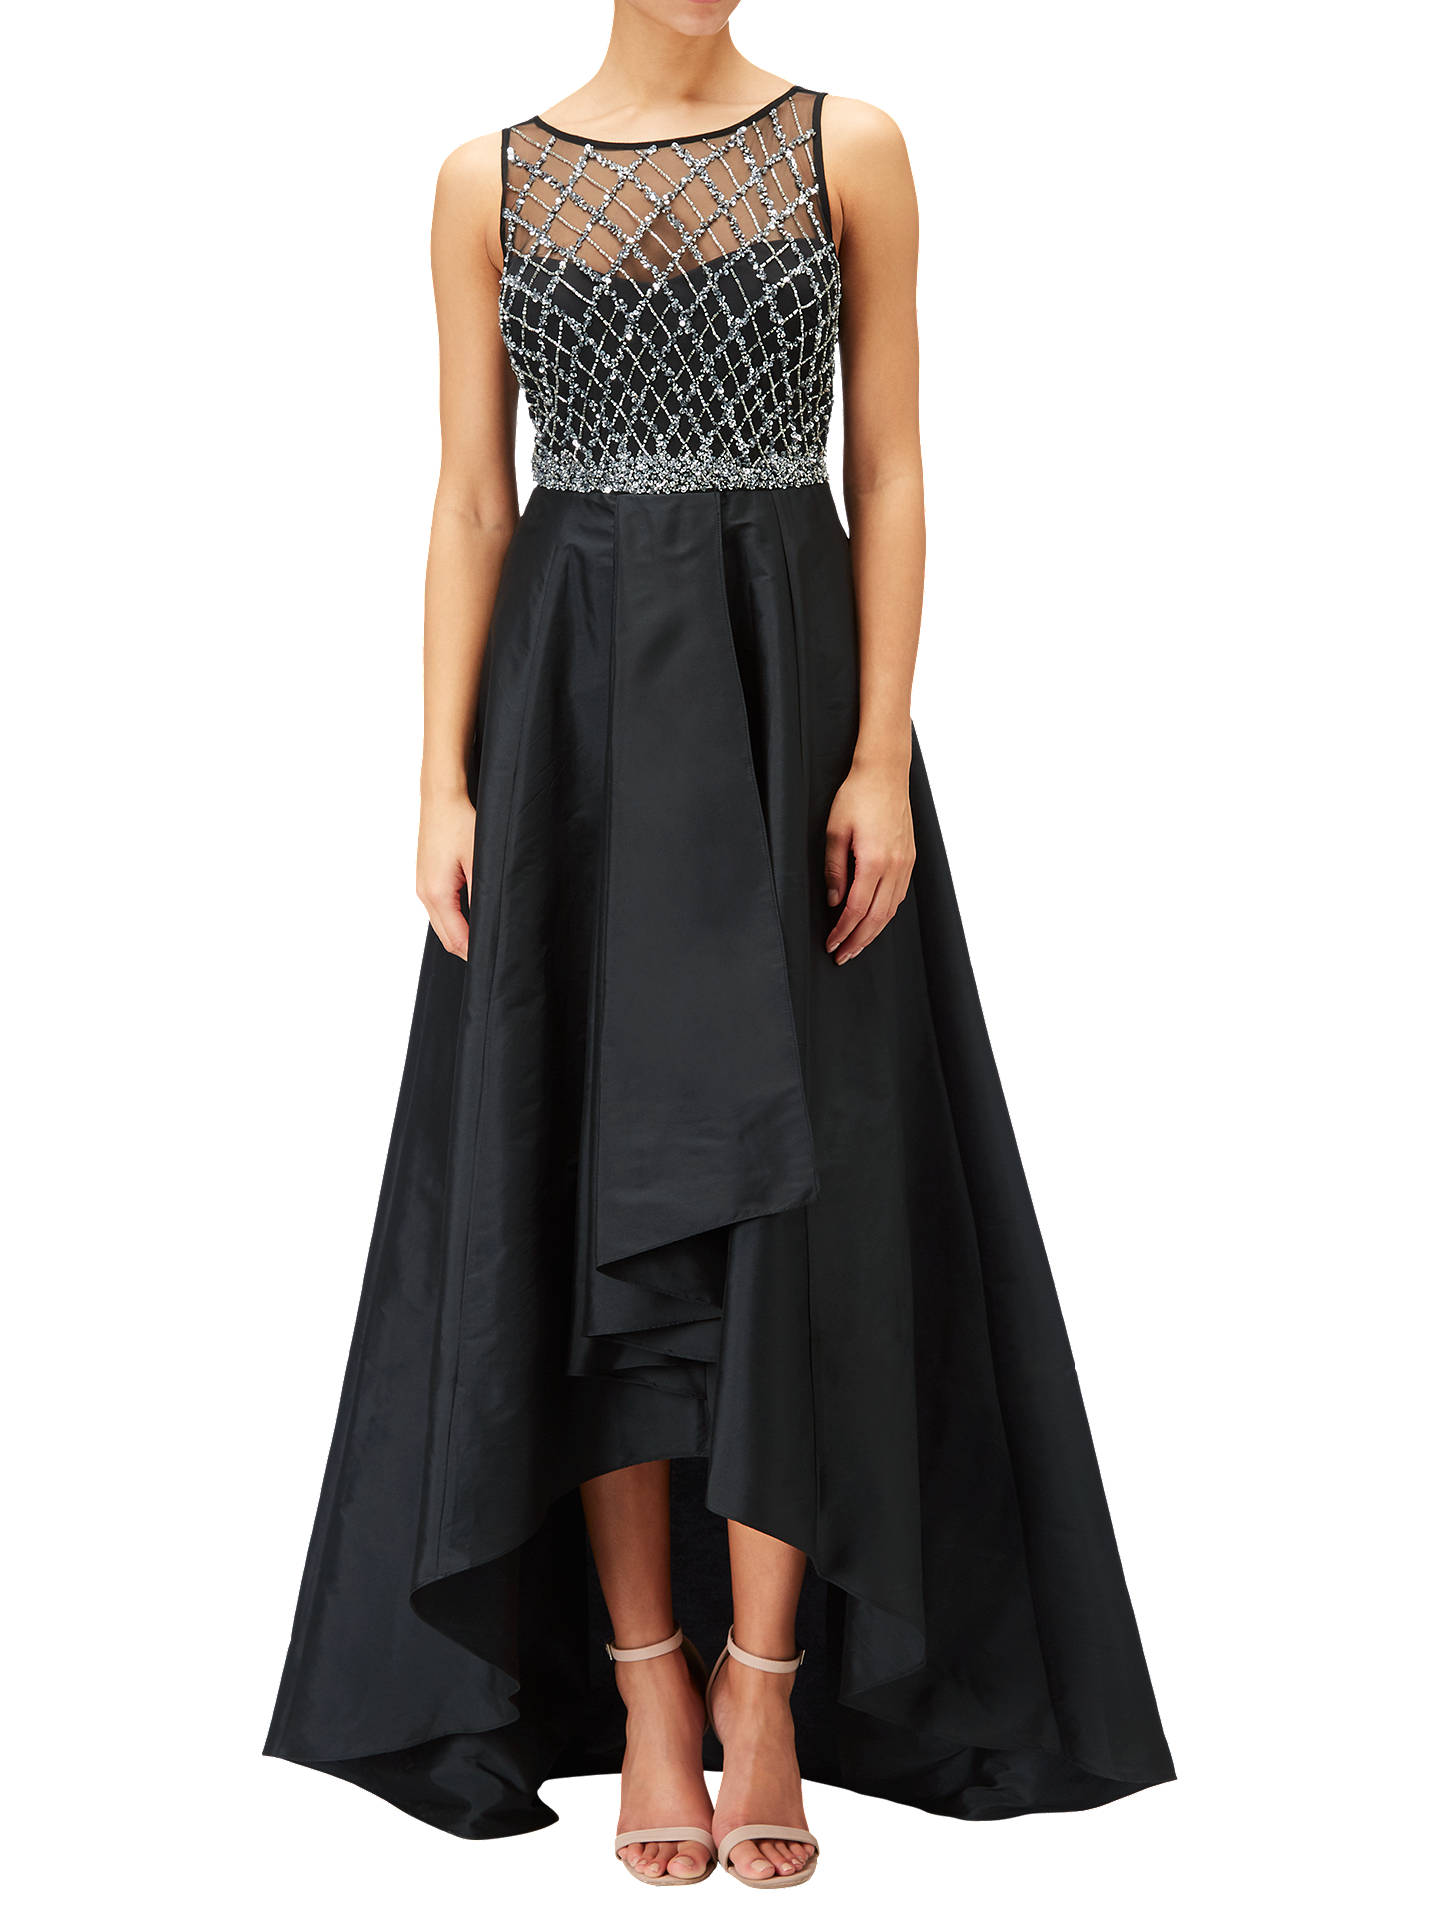 Adrianna Papell Beaded Fit And Flare Gown, Black at John Lewis & Partners